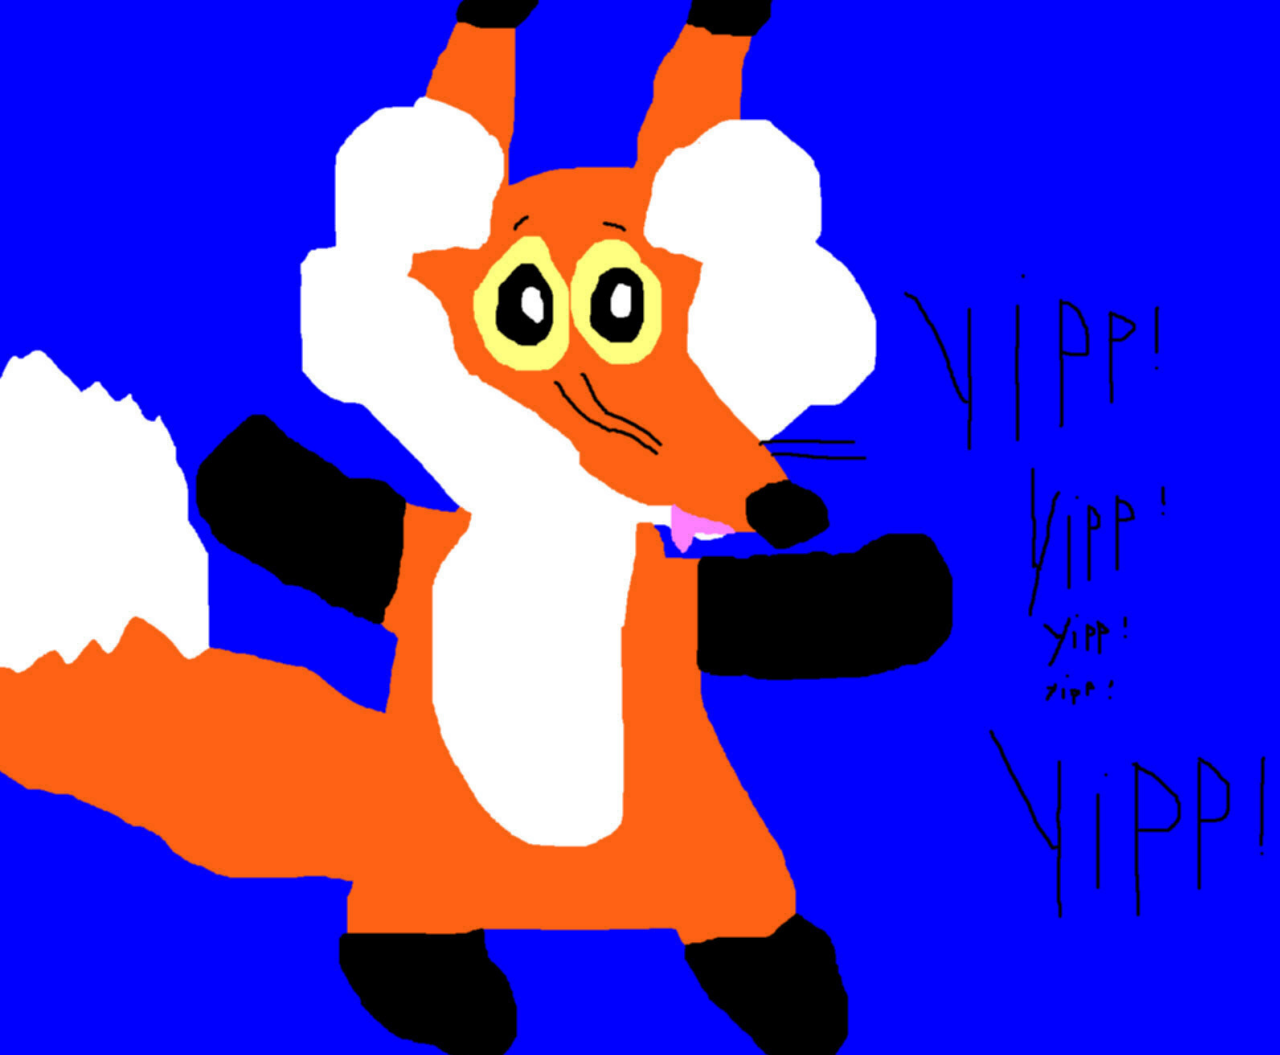 Toony Chibi Fox With Shout Refernce Ms Paint^^ by Falconlobo